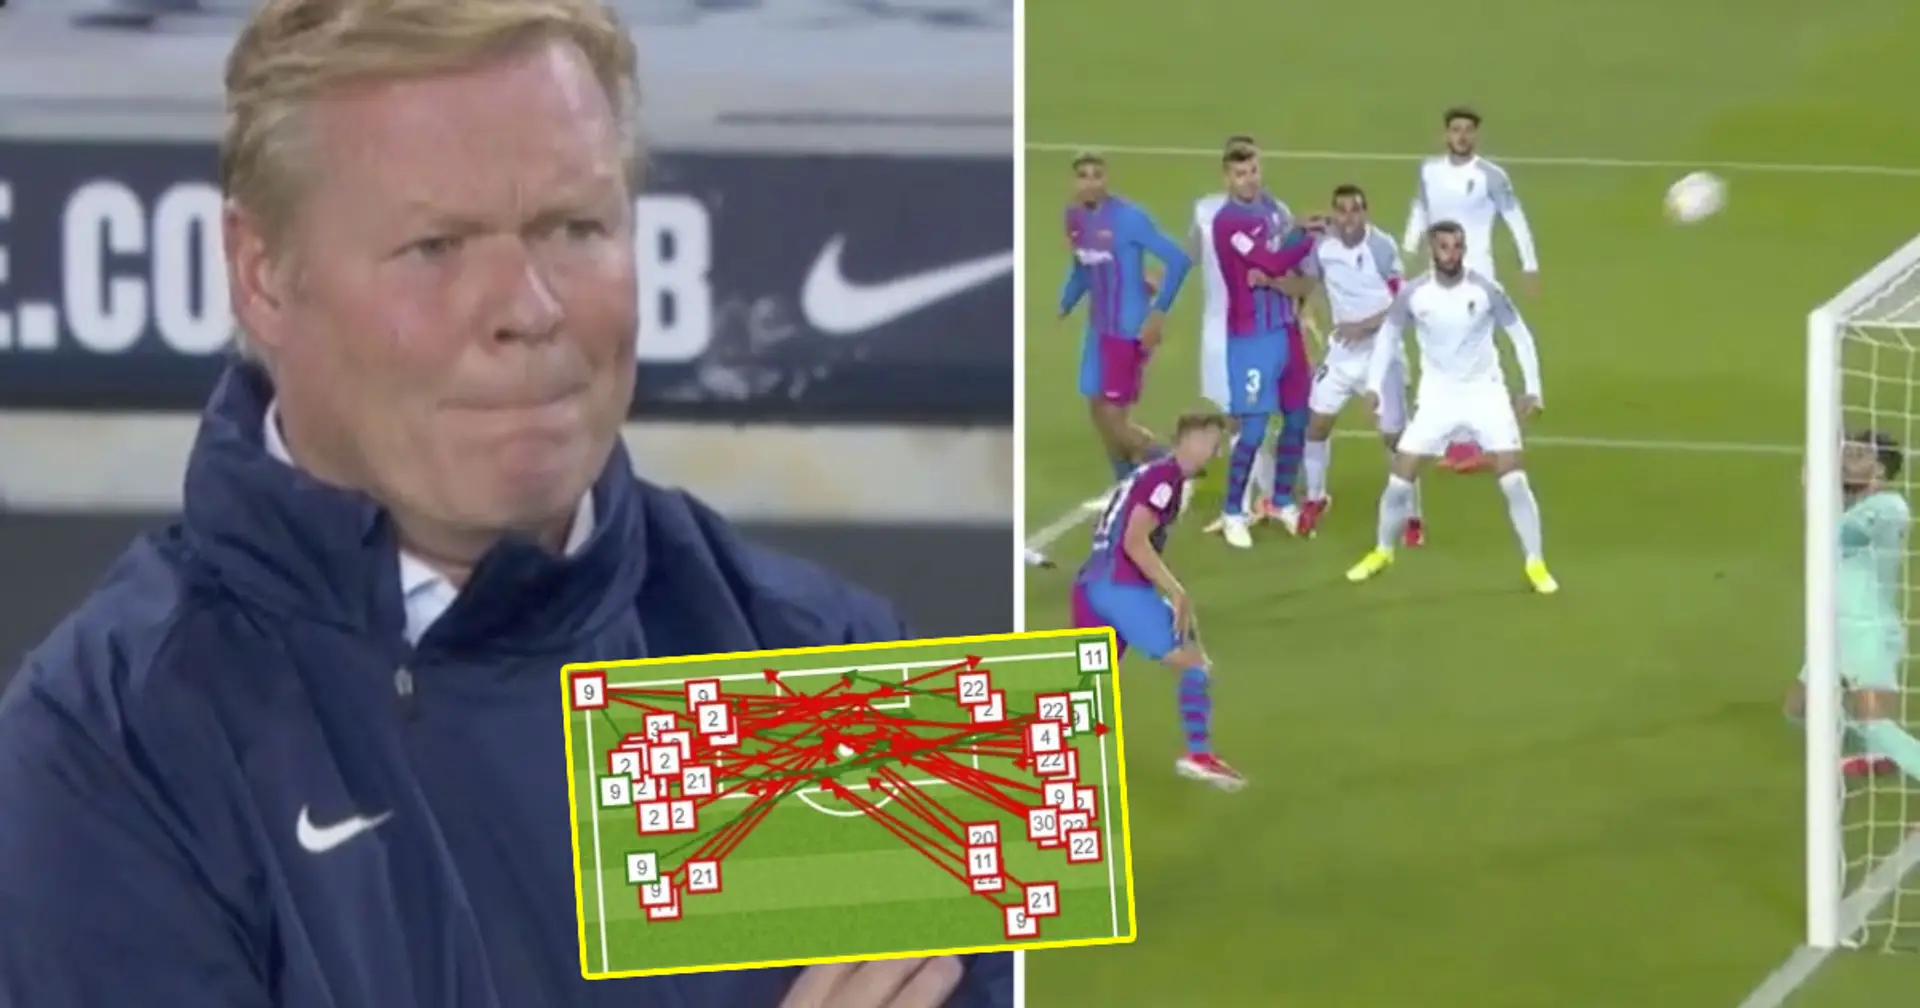 Barca record most crosses in single game in 5 years – was it any effective? Analysed